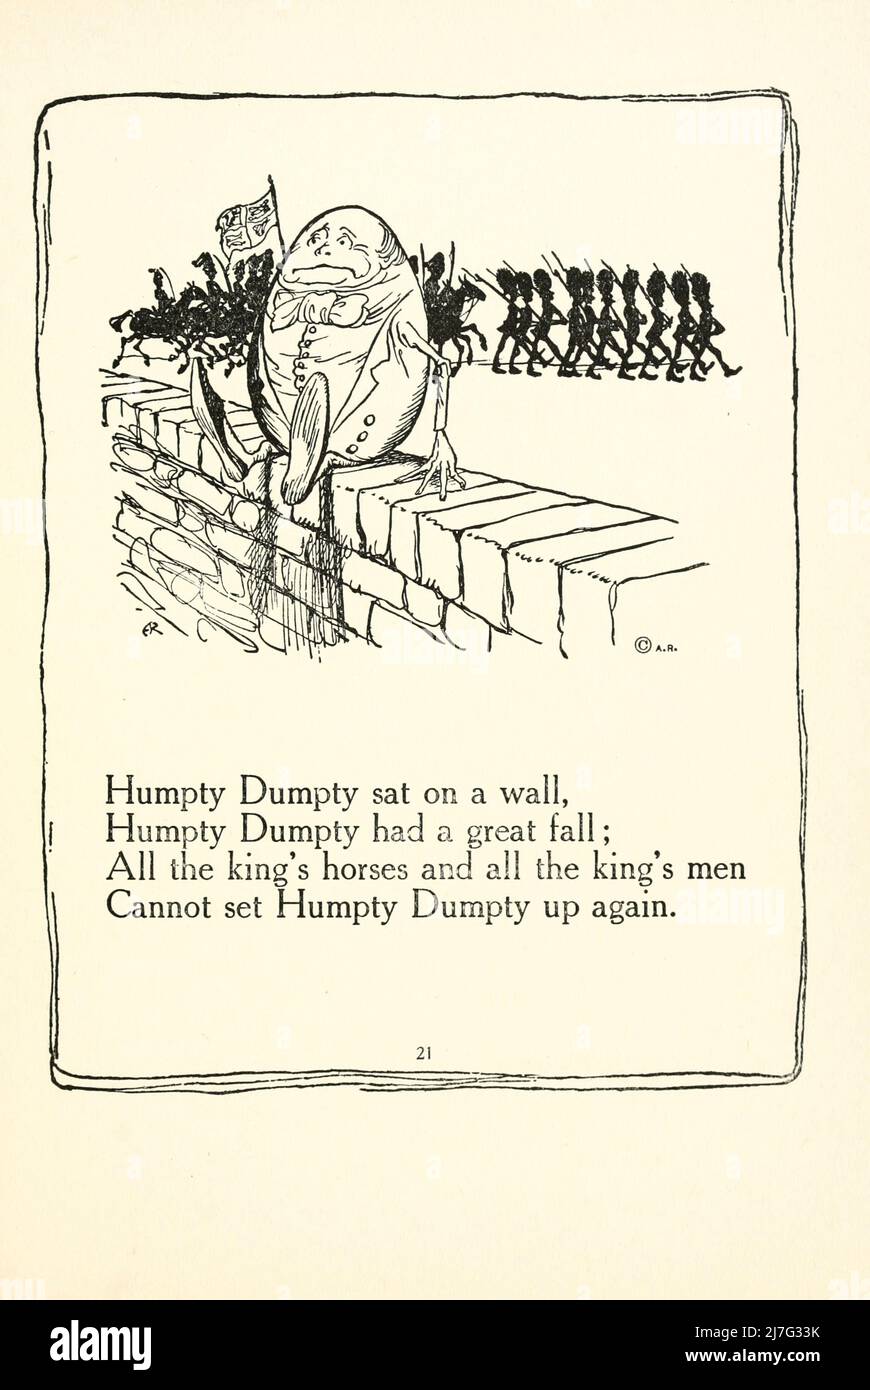 Humpty Dumpty sat on a wall, Humpty Dumpty had a great fall ; All the king's horses and all the king's men Cannot set Humpty Dumpty up again from ' Mother Goose The old nursery rhymes ' illustrated by Arthur Rackham, Published in 1913 Stock Photo